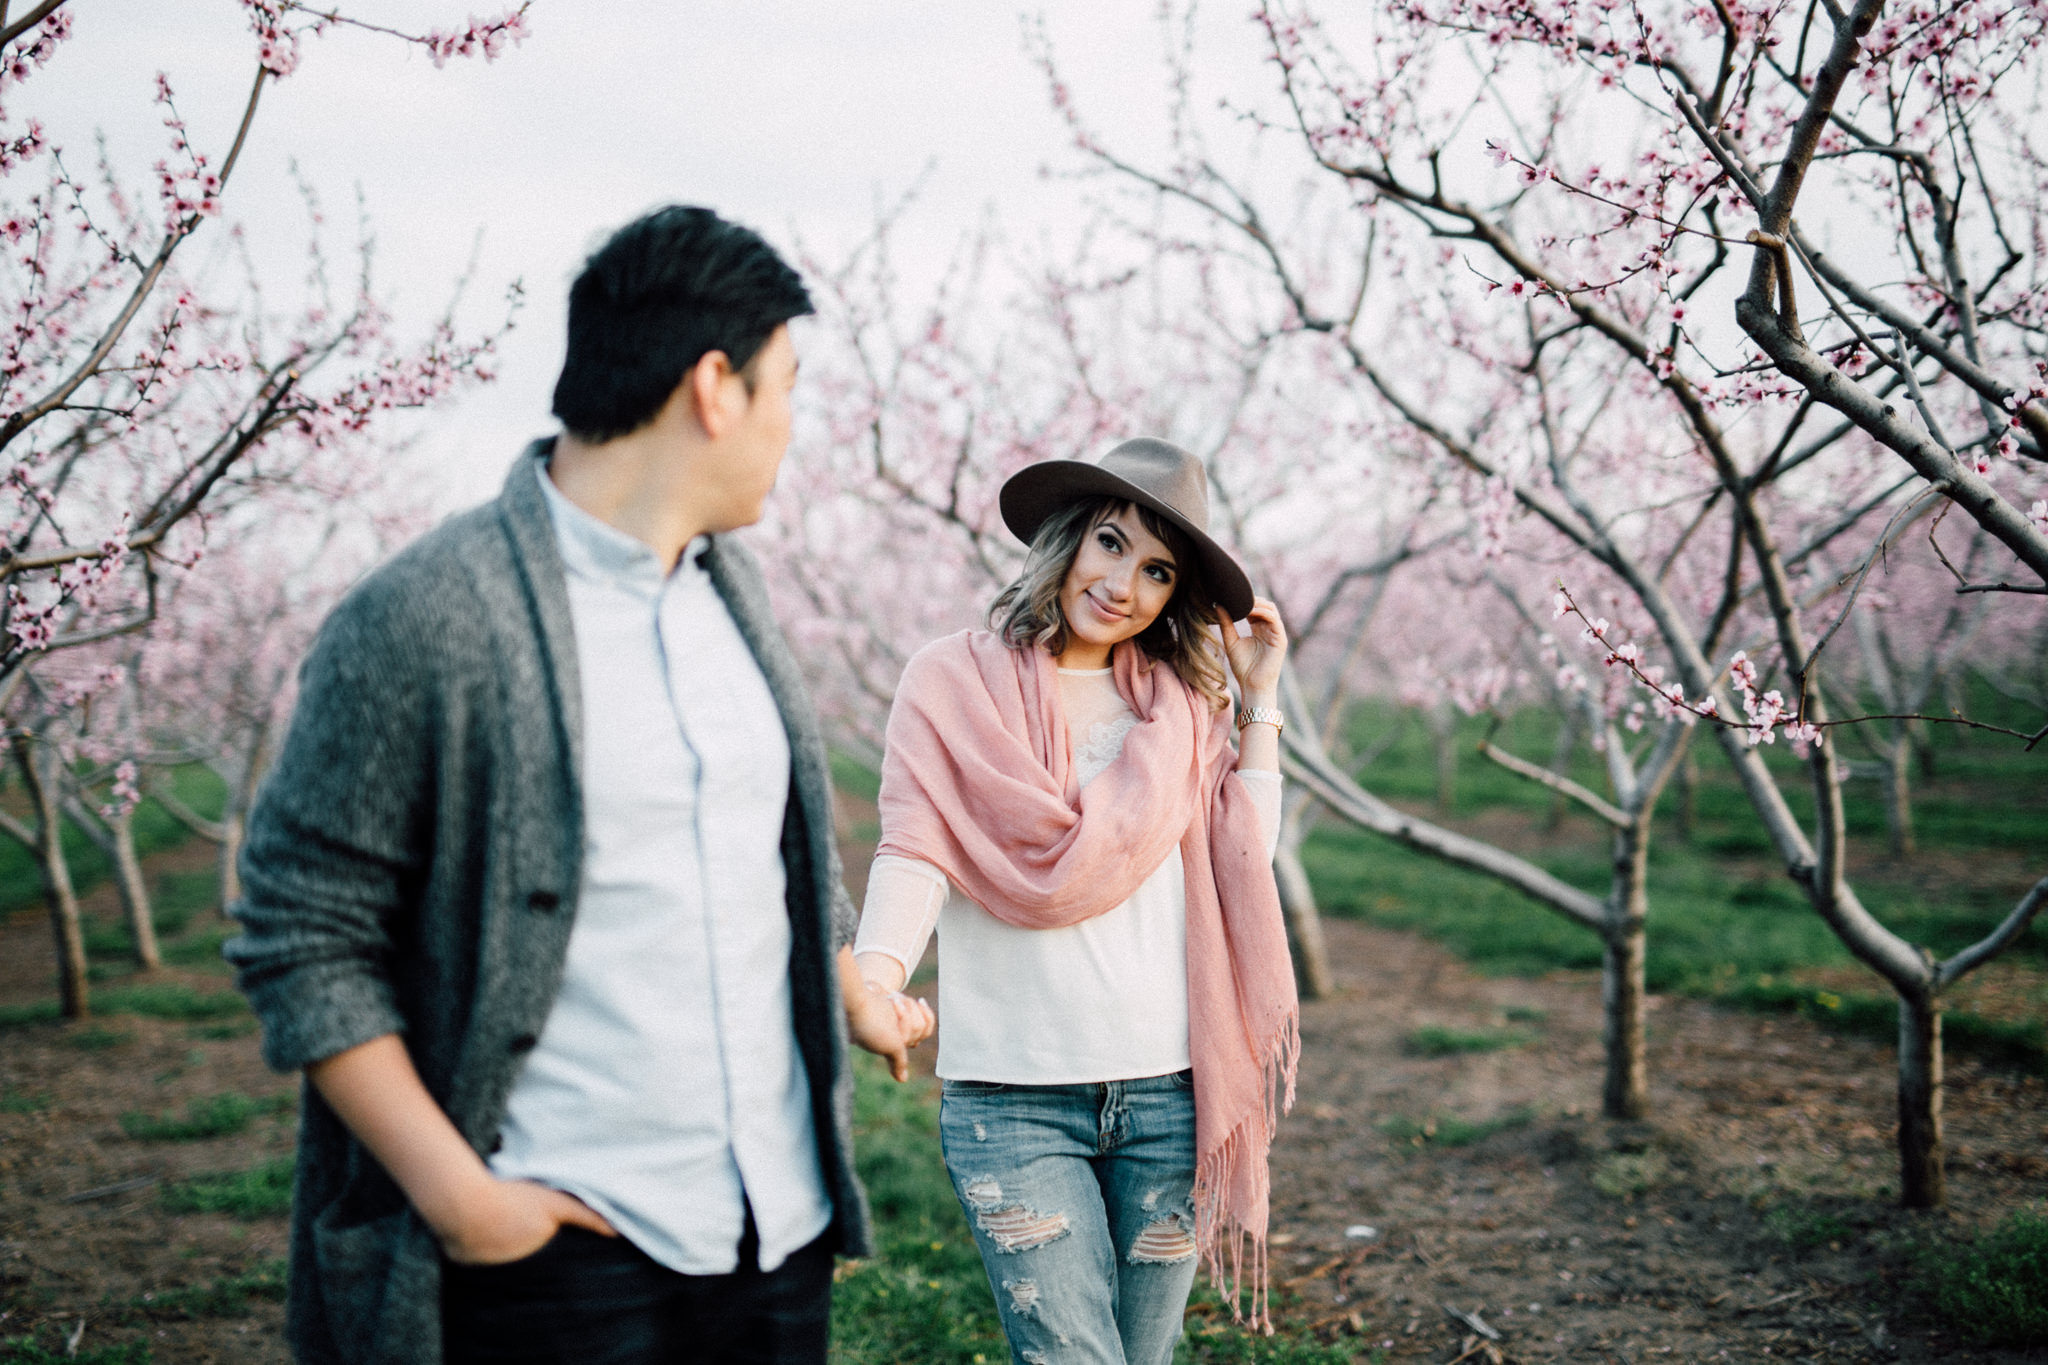 Niagara-Portrait-Session-Niagara-On-The-Lake-Cherry-Blossoms-photography-by-Simply-Lace-Photography-033.JPG